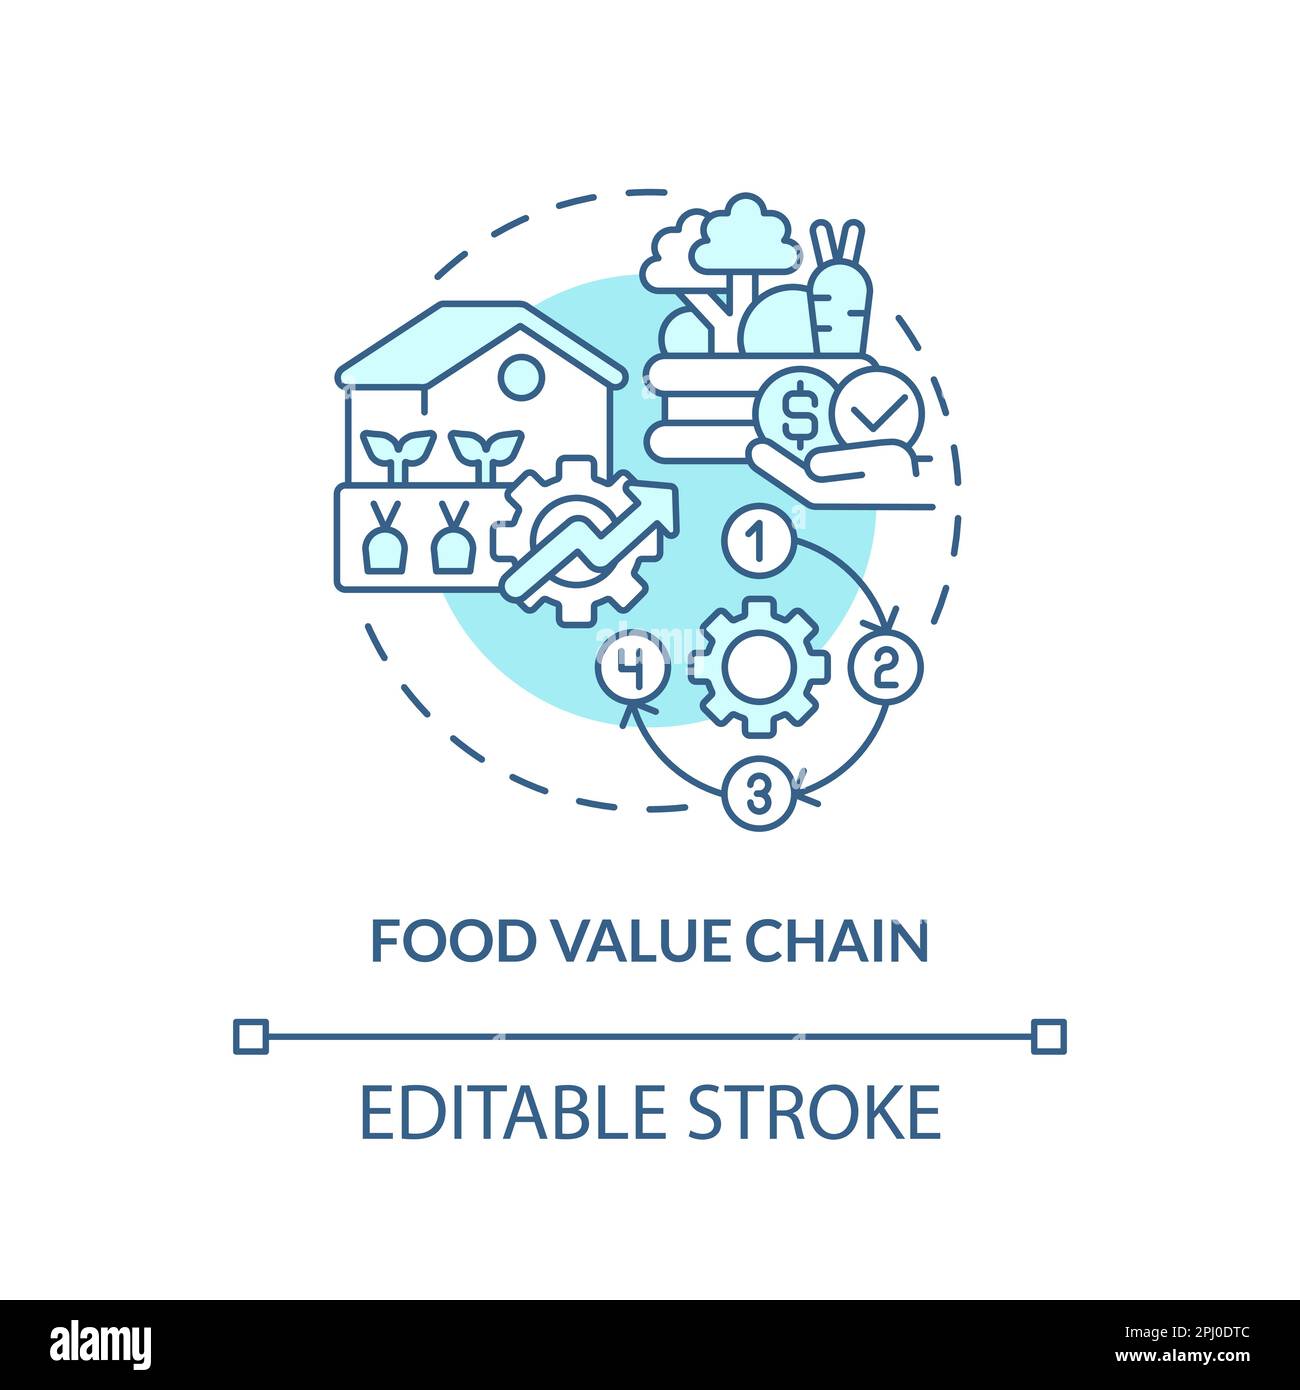 Food value chain turquoise concept icon Stock Vector